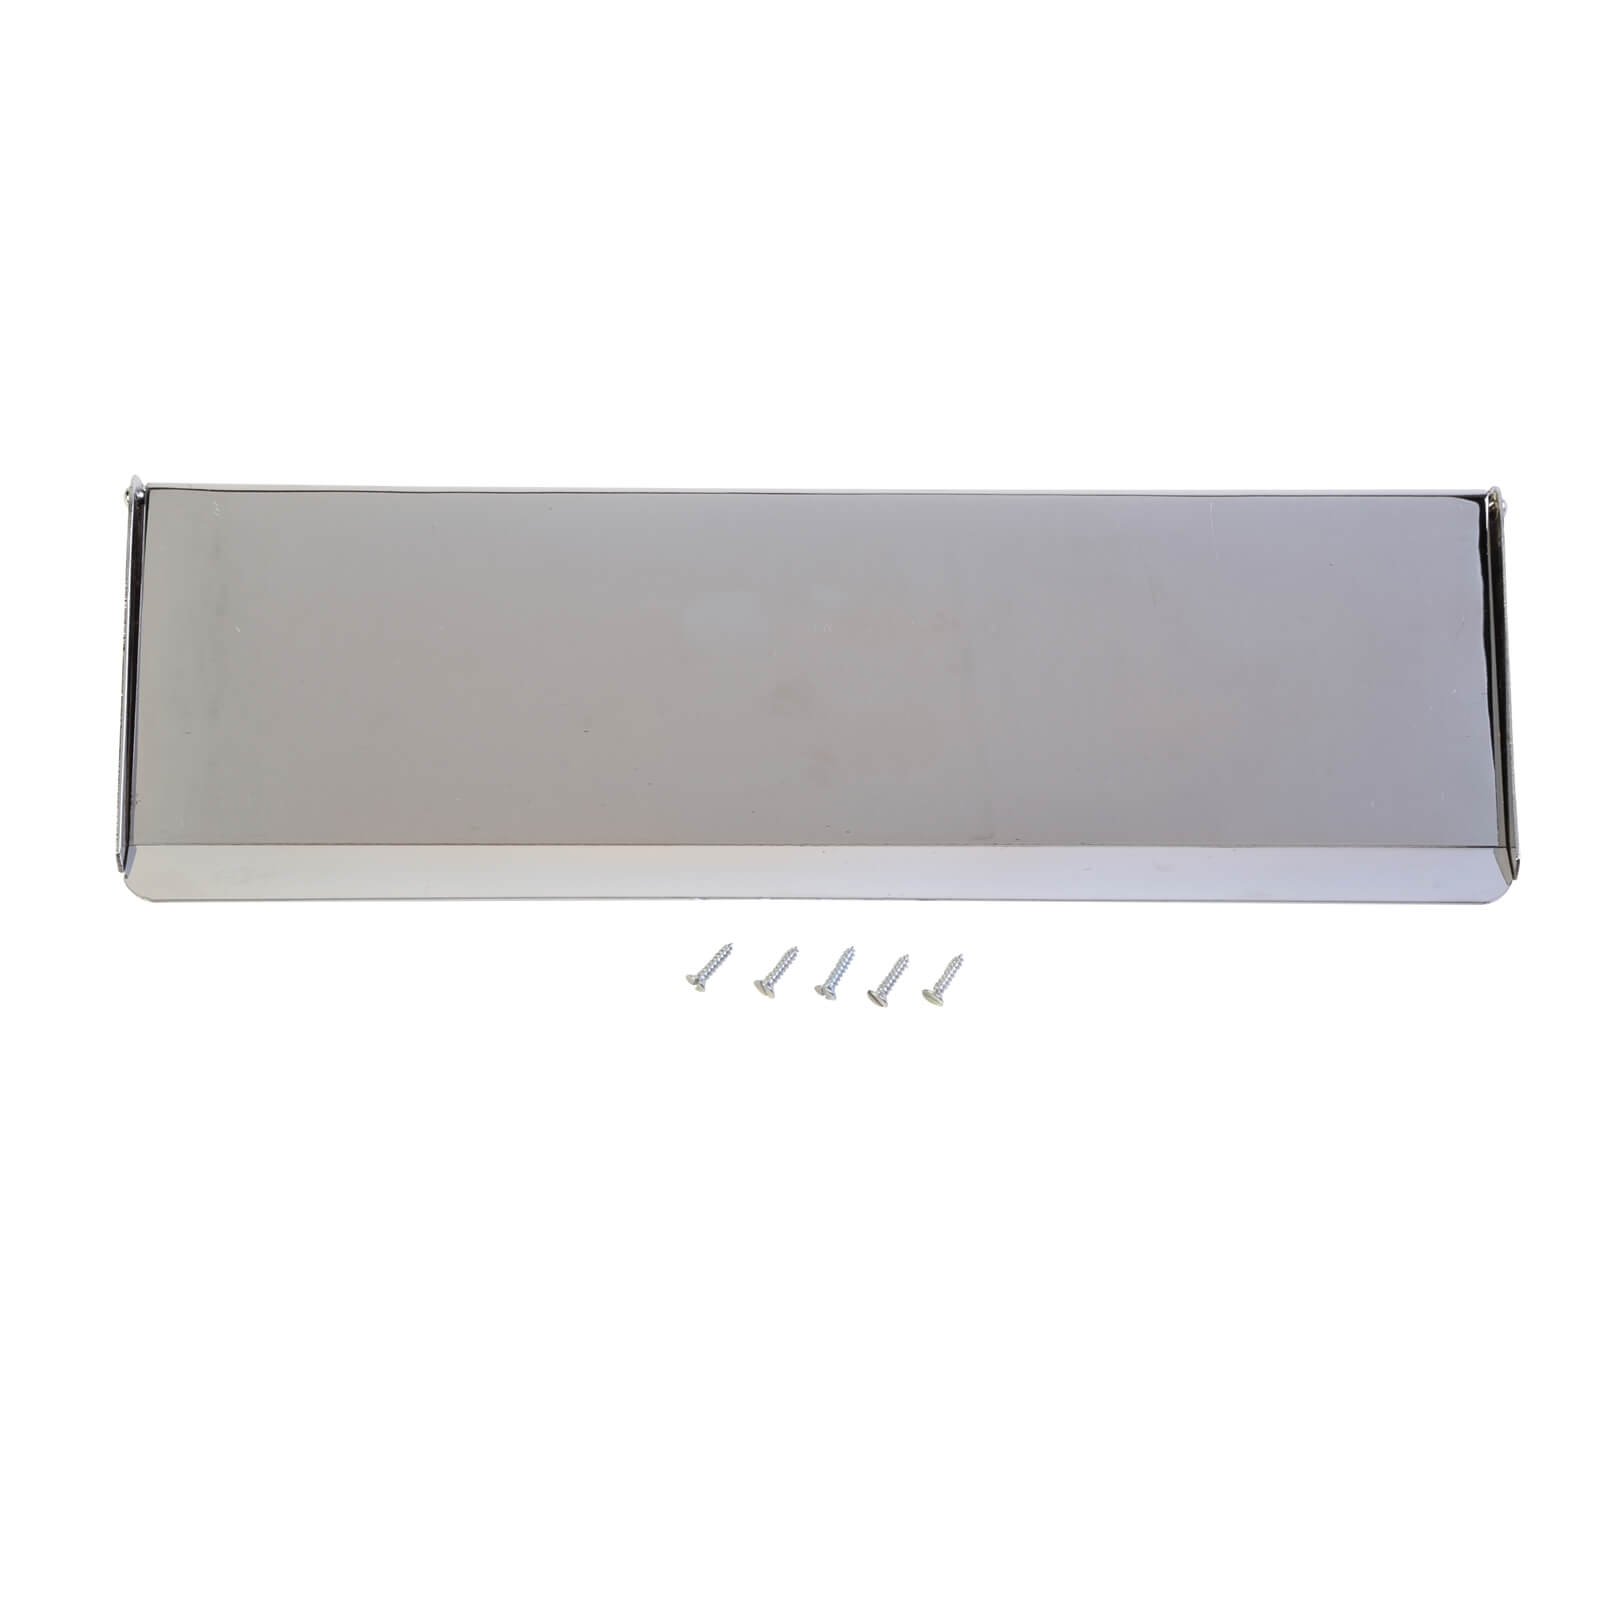 Polished Chrome Letter Tidy - 306 x 96mm